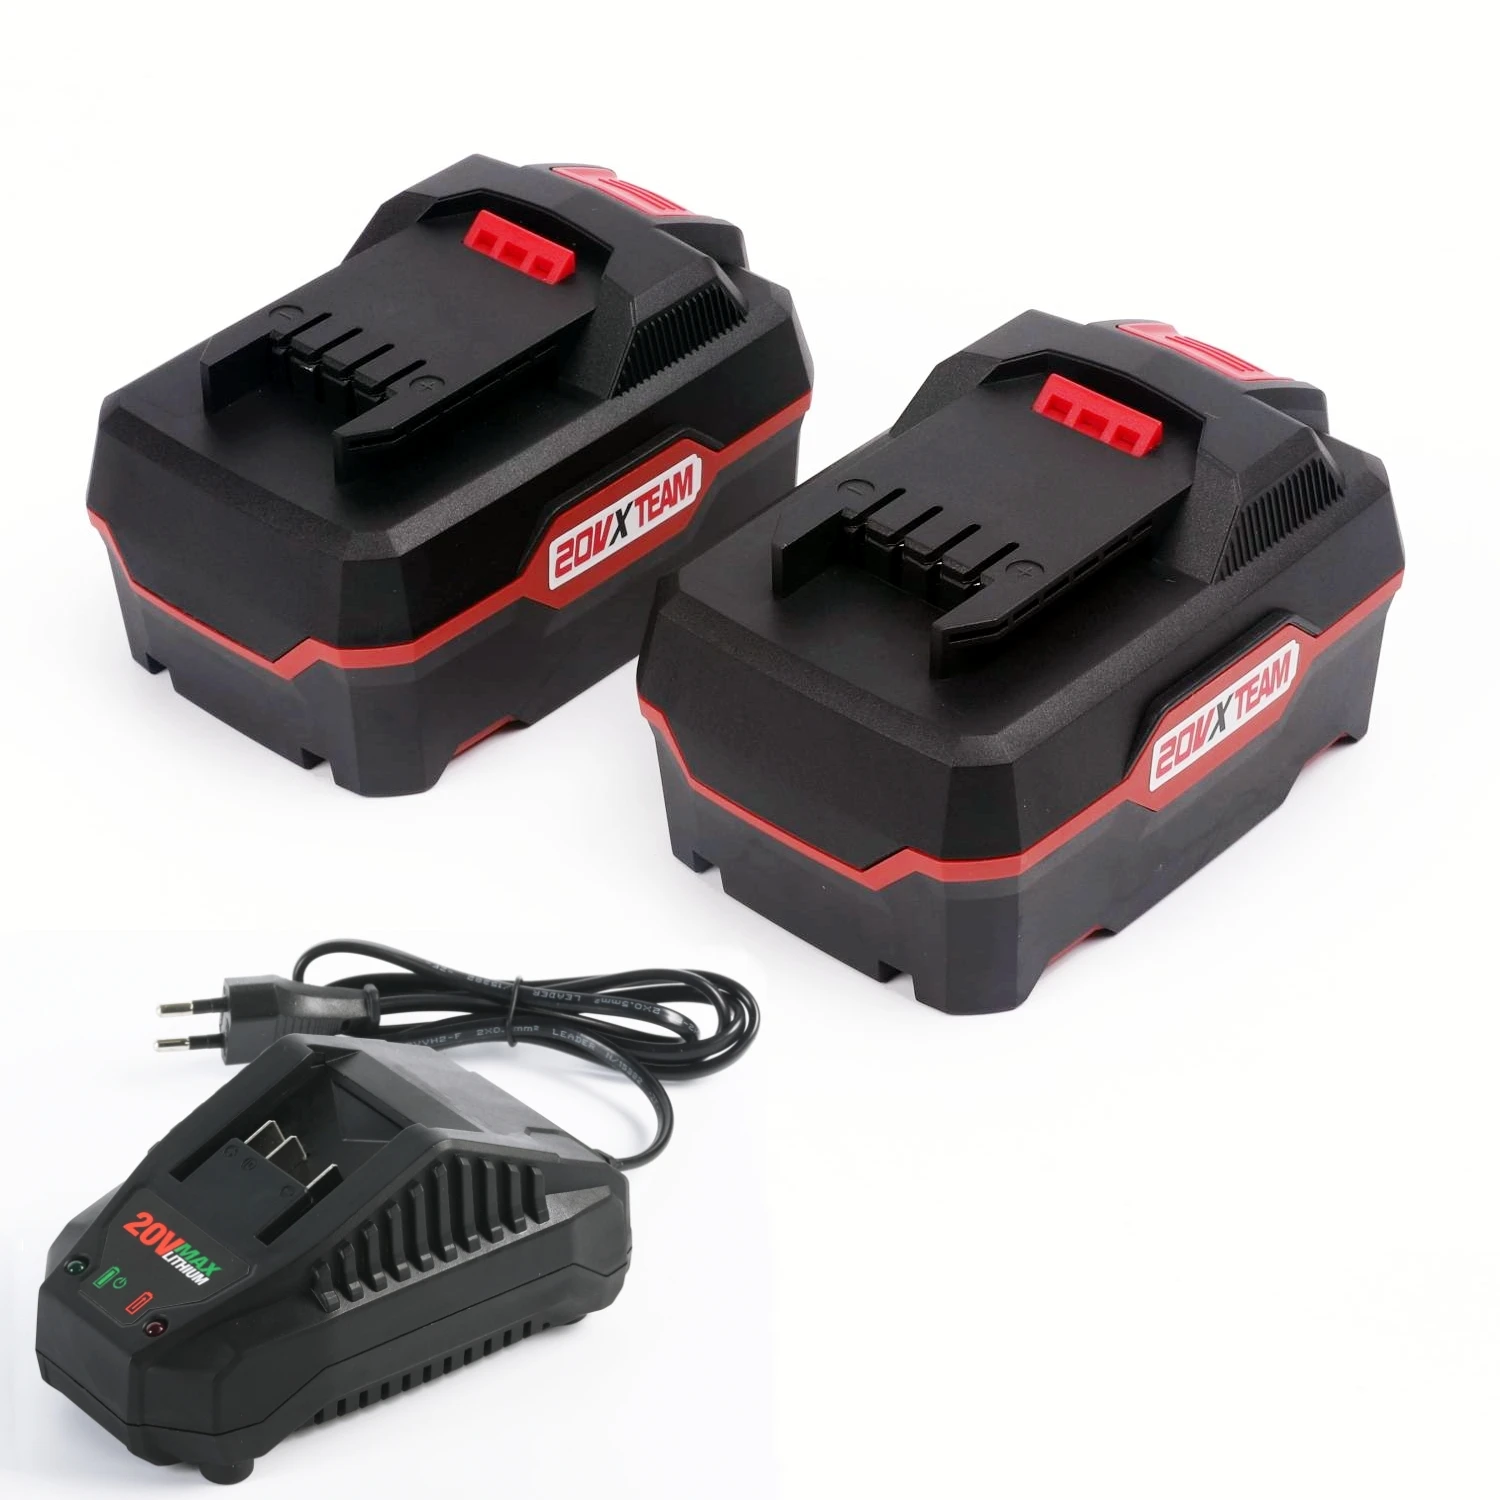 

Two 20V 5Ah Akku, One 2.4A Fast Charger for Parkside 20V Team Cordless Power Tool for for PAP 20 A3, PAP 20 B3, PAPS 208 A1